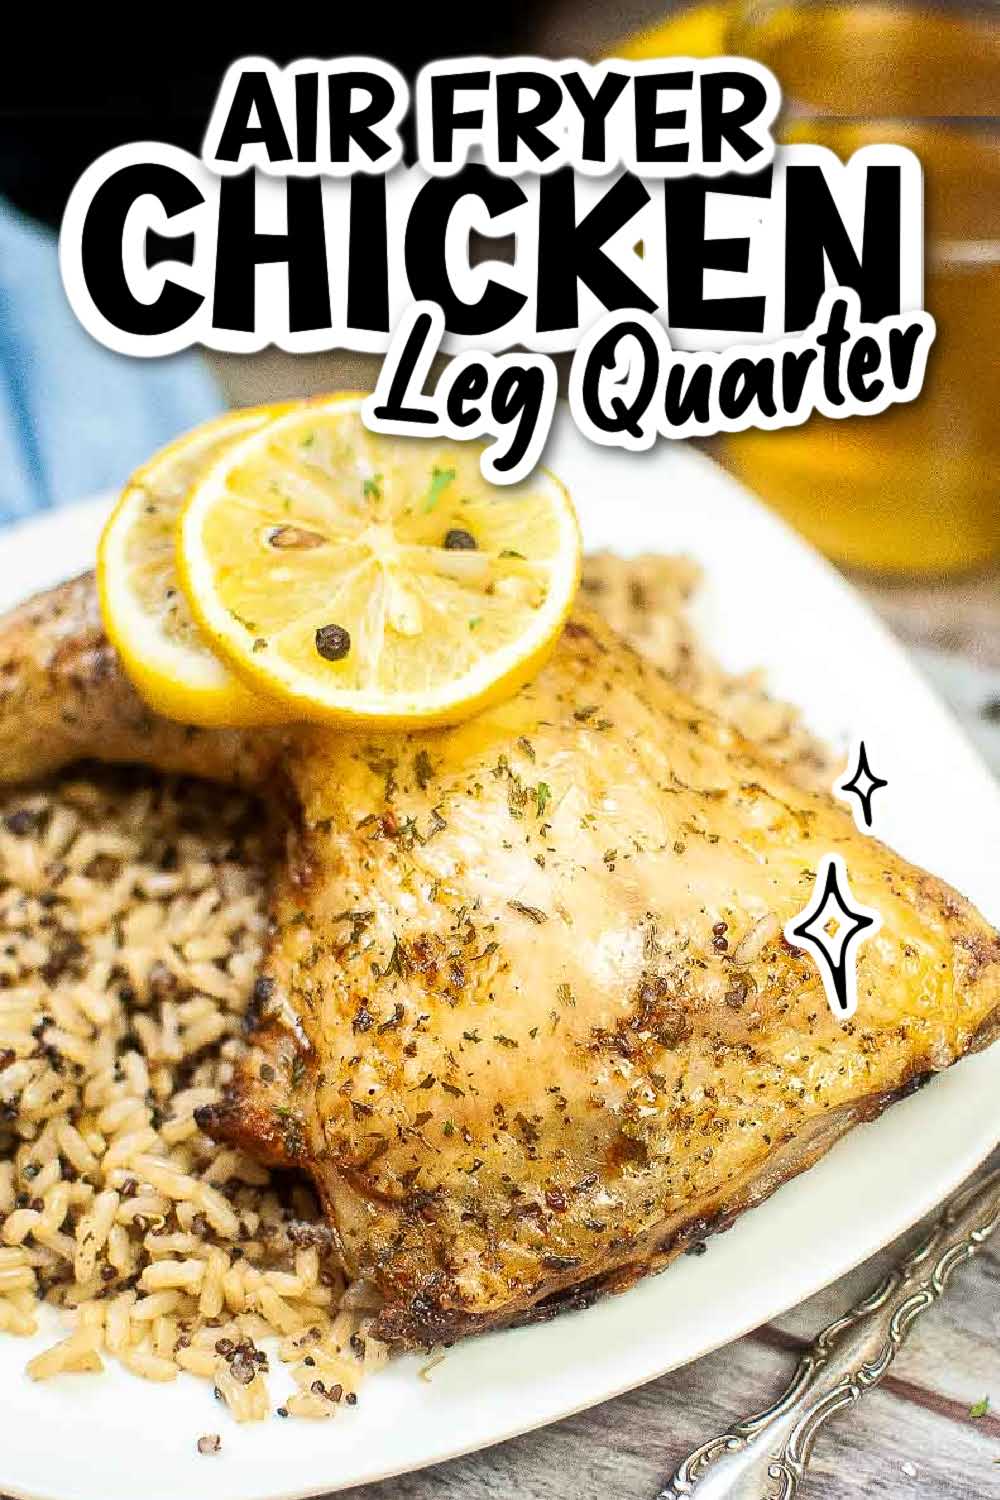 Air fryer chicken leg quarter topped with a lemon slice on a white plate with rice with text overlay.